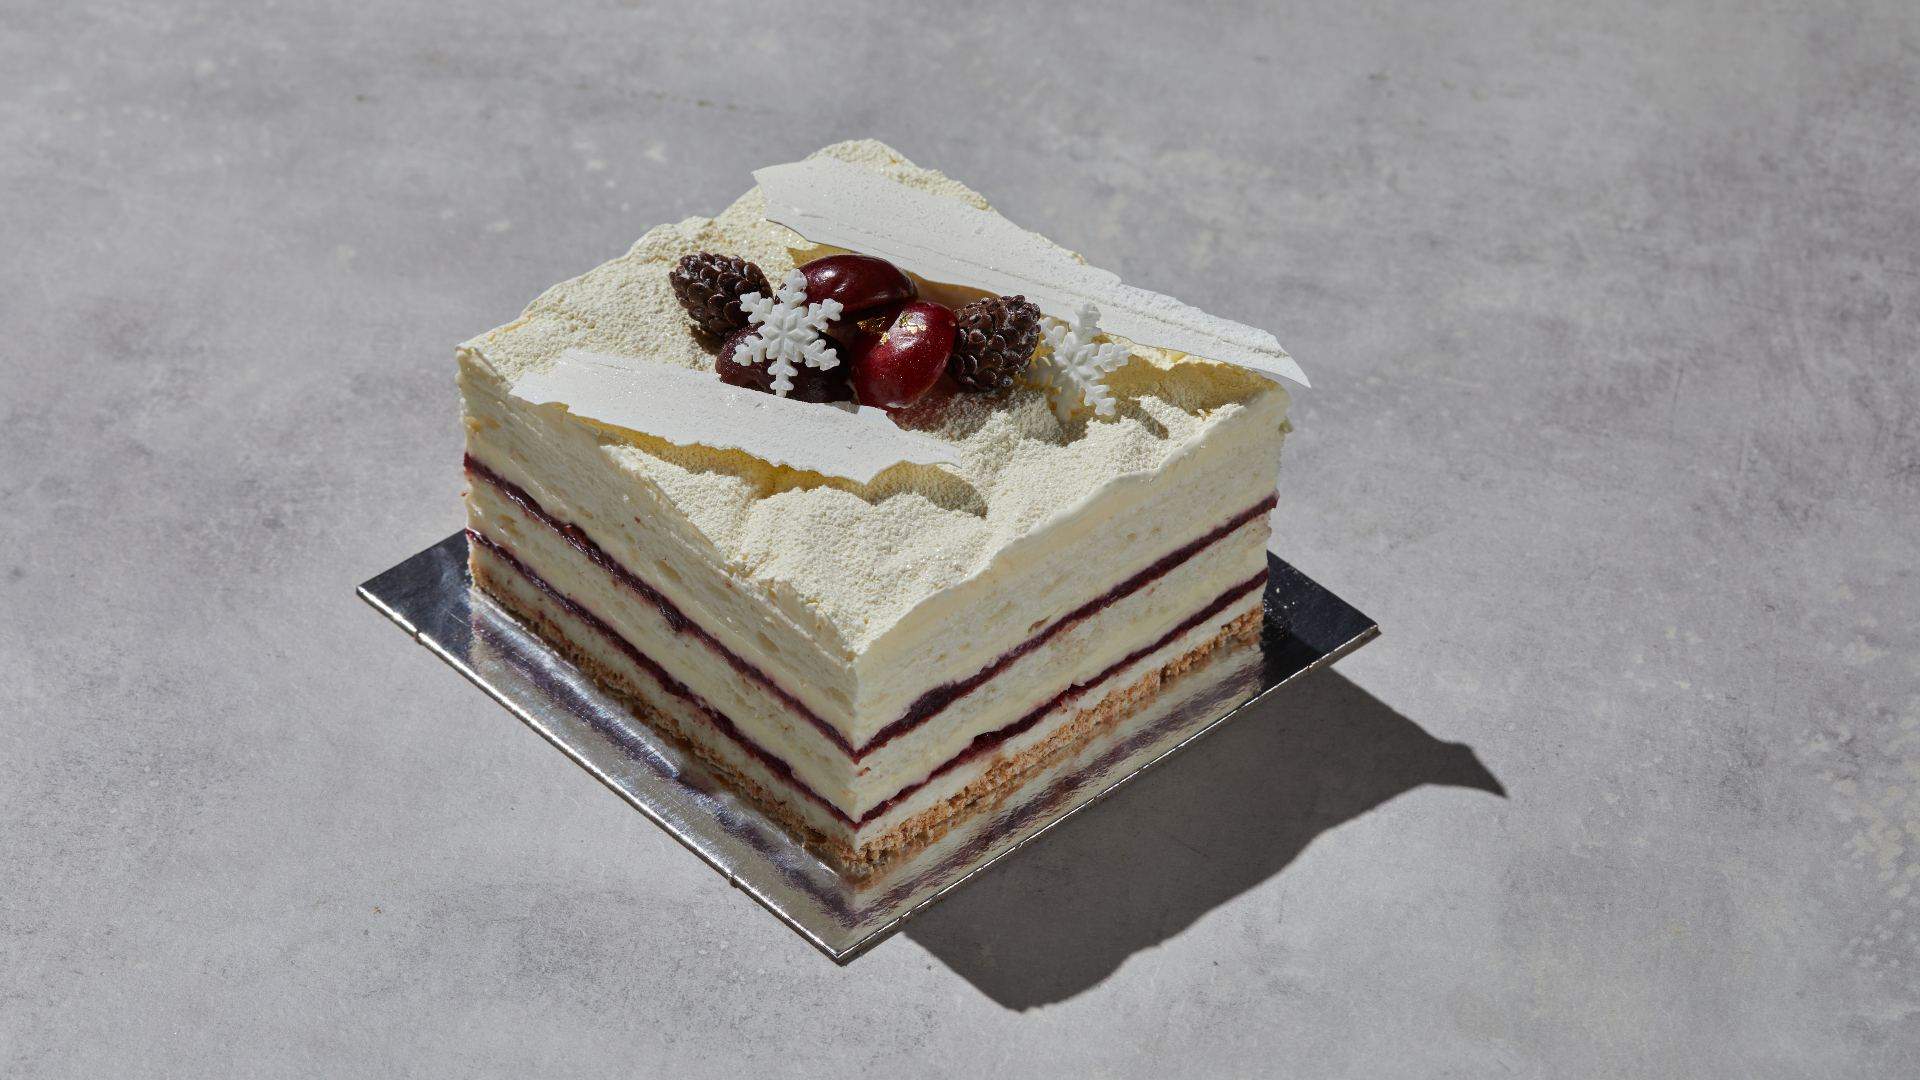 Black Star Has Created a Limited-Edition Festive Cake If You Fancy a Sweet White Christmas